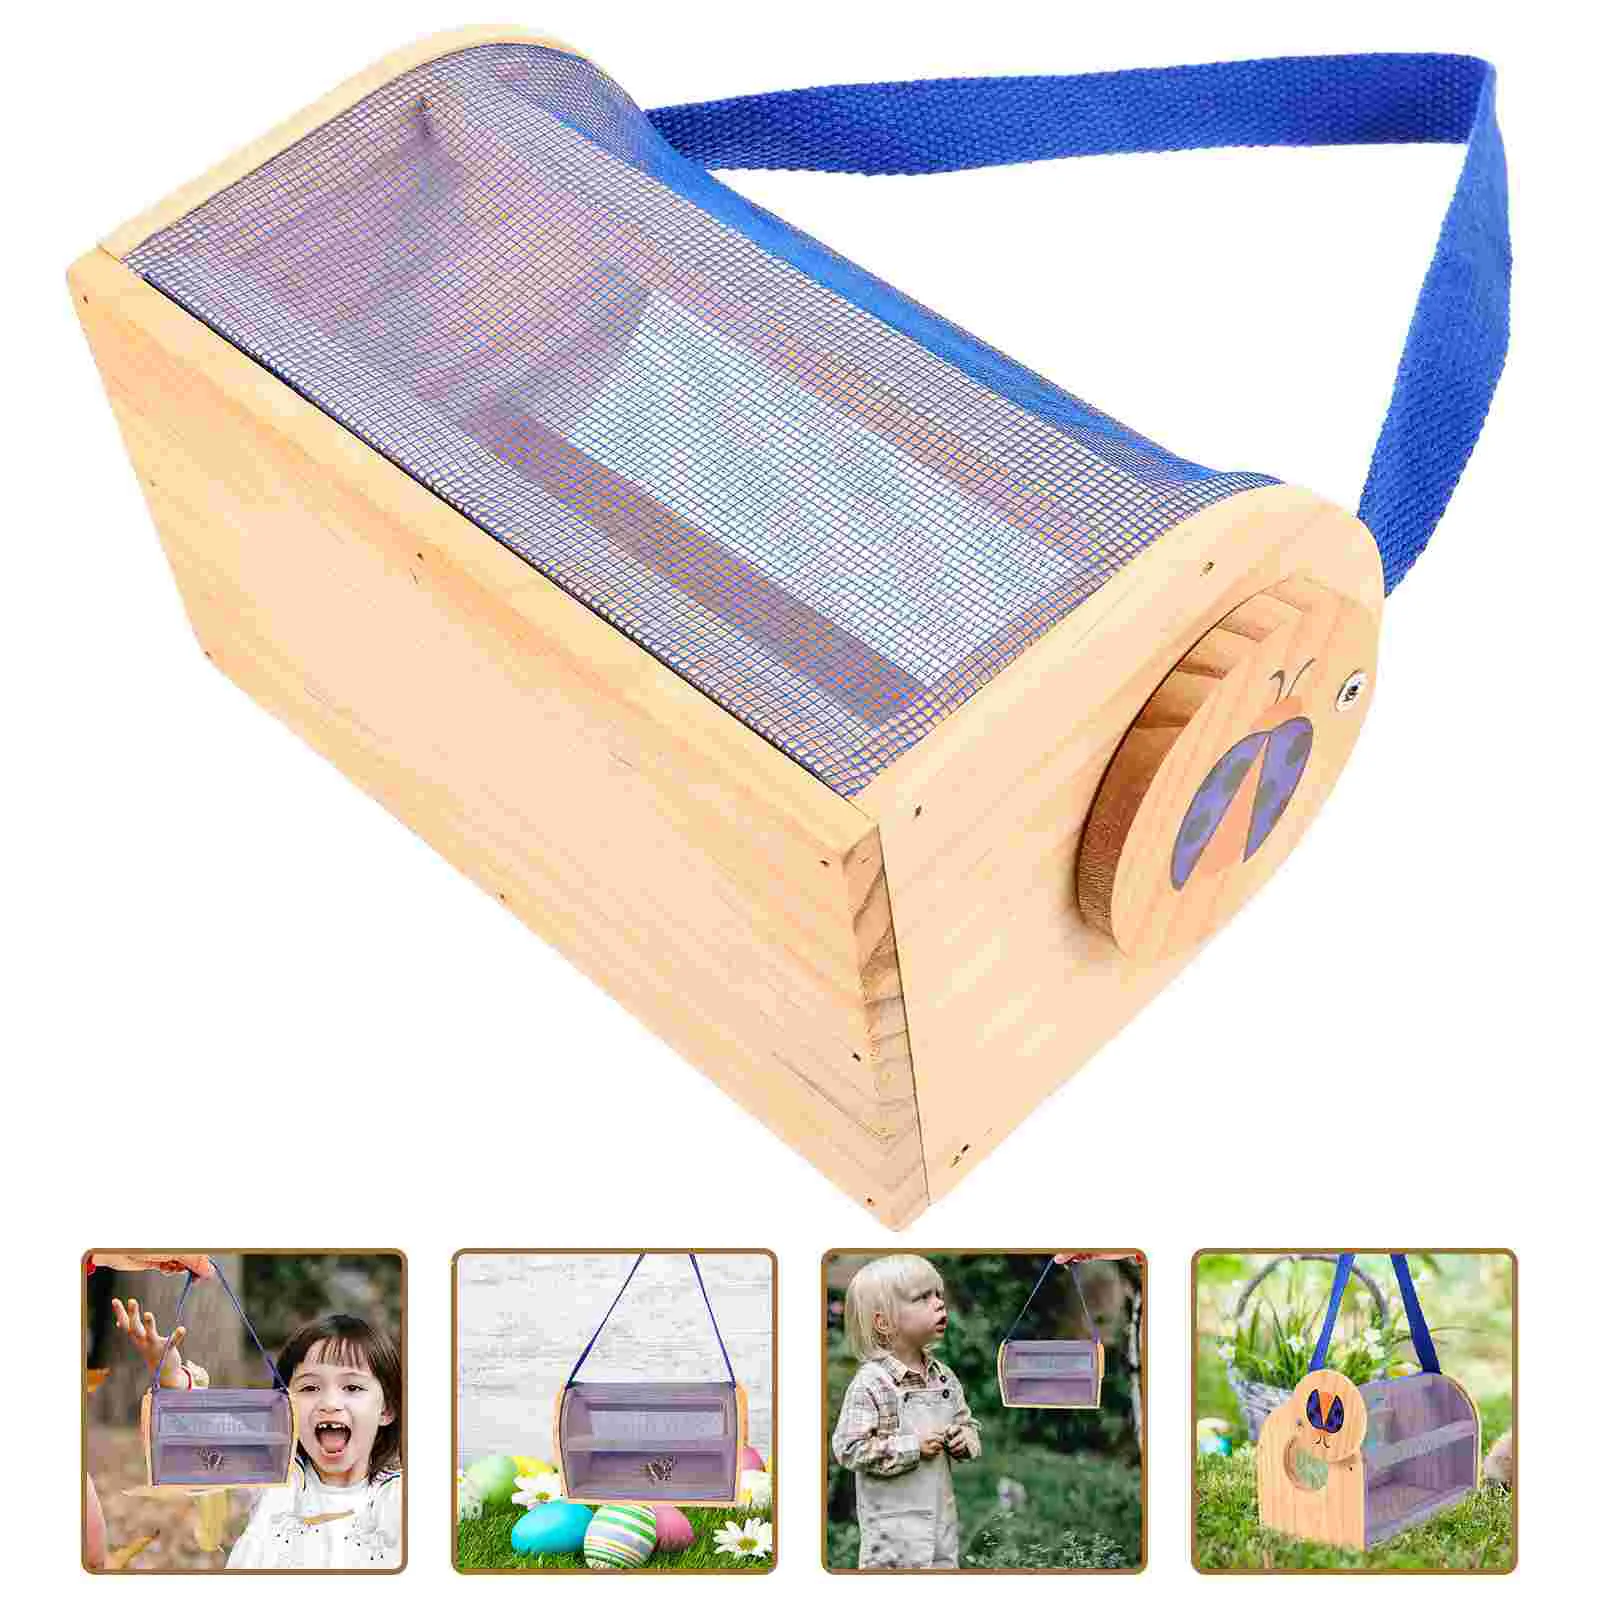 

Insect Observation Box Plastic Bug Catcher Plastic Insect Box Kids Educational Plaything for Kids Toddler